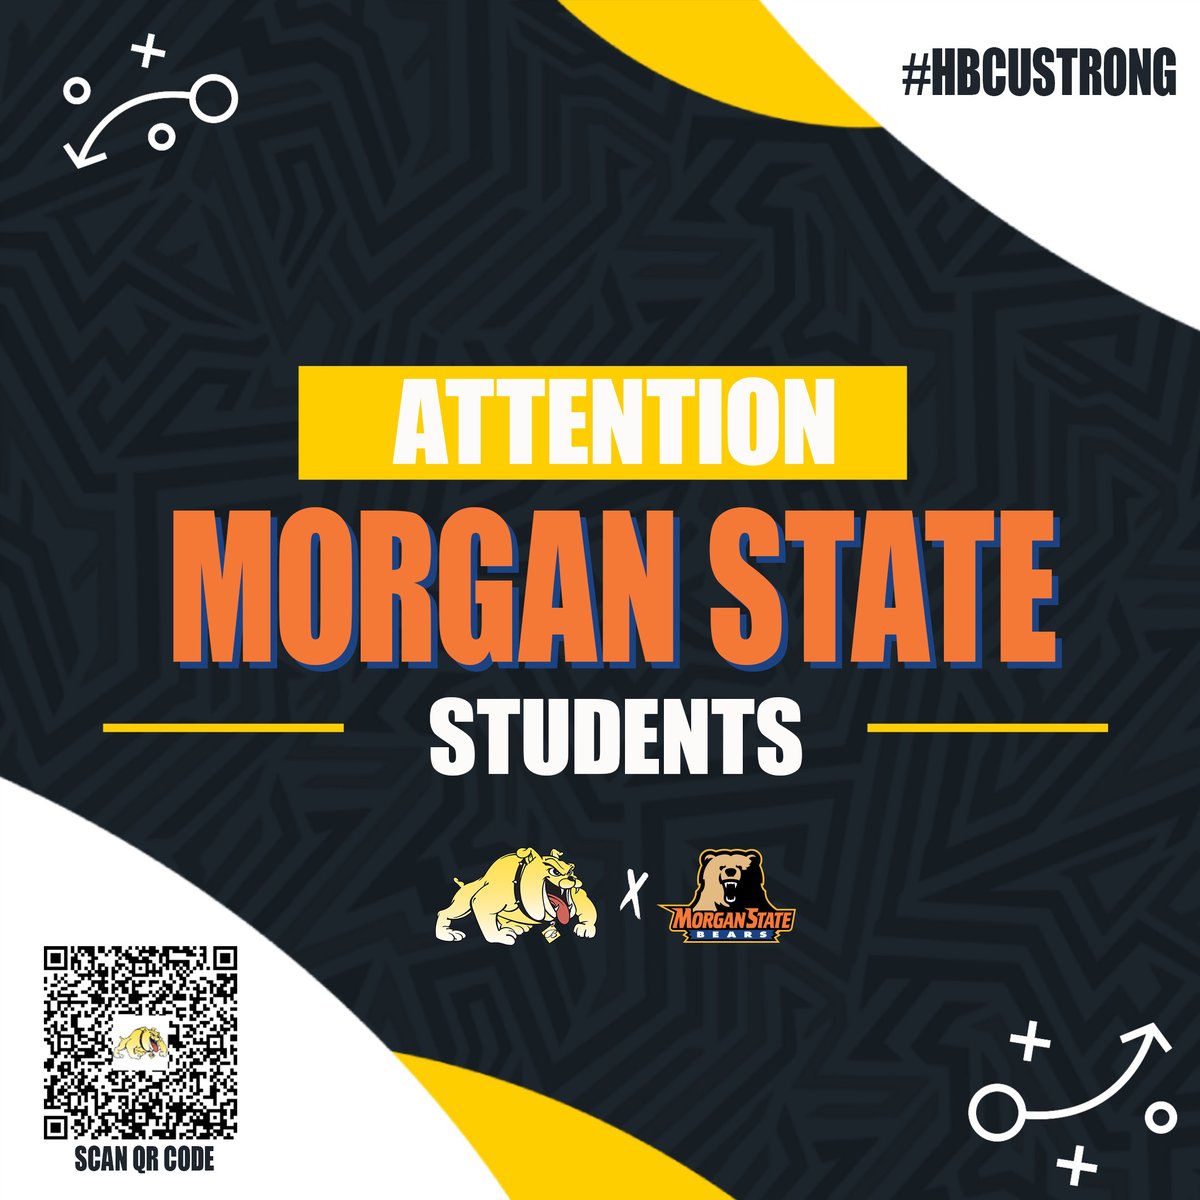 We stand in solidarity and welcome @MorganStBears  to enjoy the celebrations of Homecoming at Bowie State. Together, we are HBCU Strong.

We're offering a free game ticket to @MorganStBears students! 🎟️: shorturl.at/dzCT3
#BulldogNation #BiteDown #HBCUStrong #WeStandWithMSU